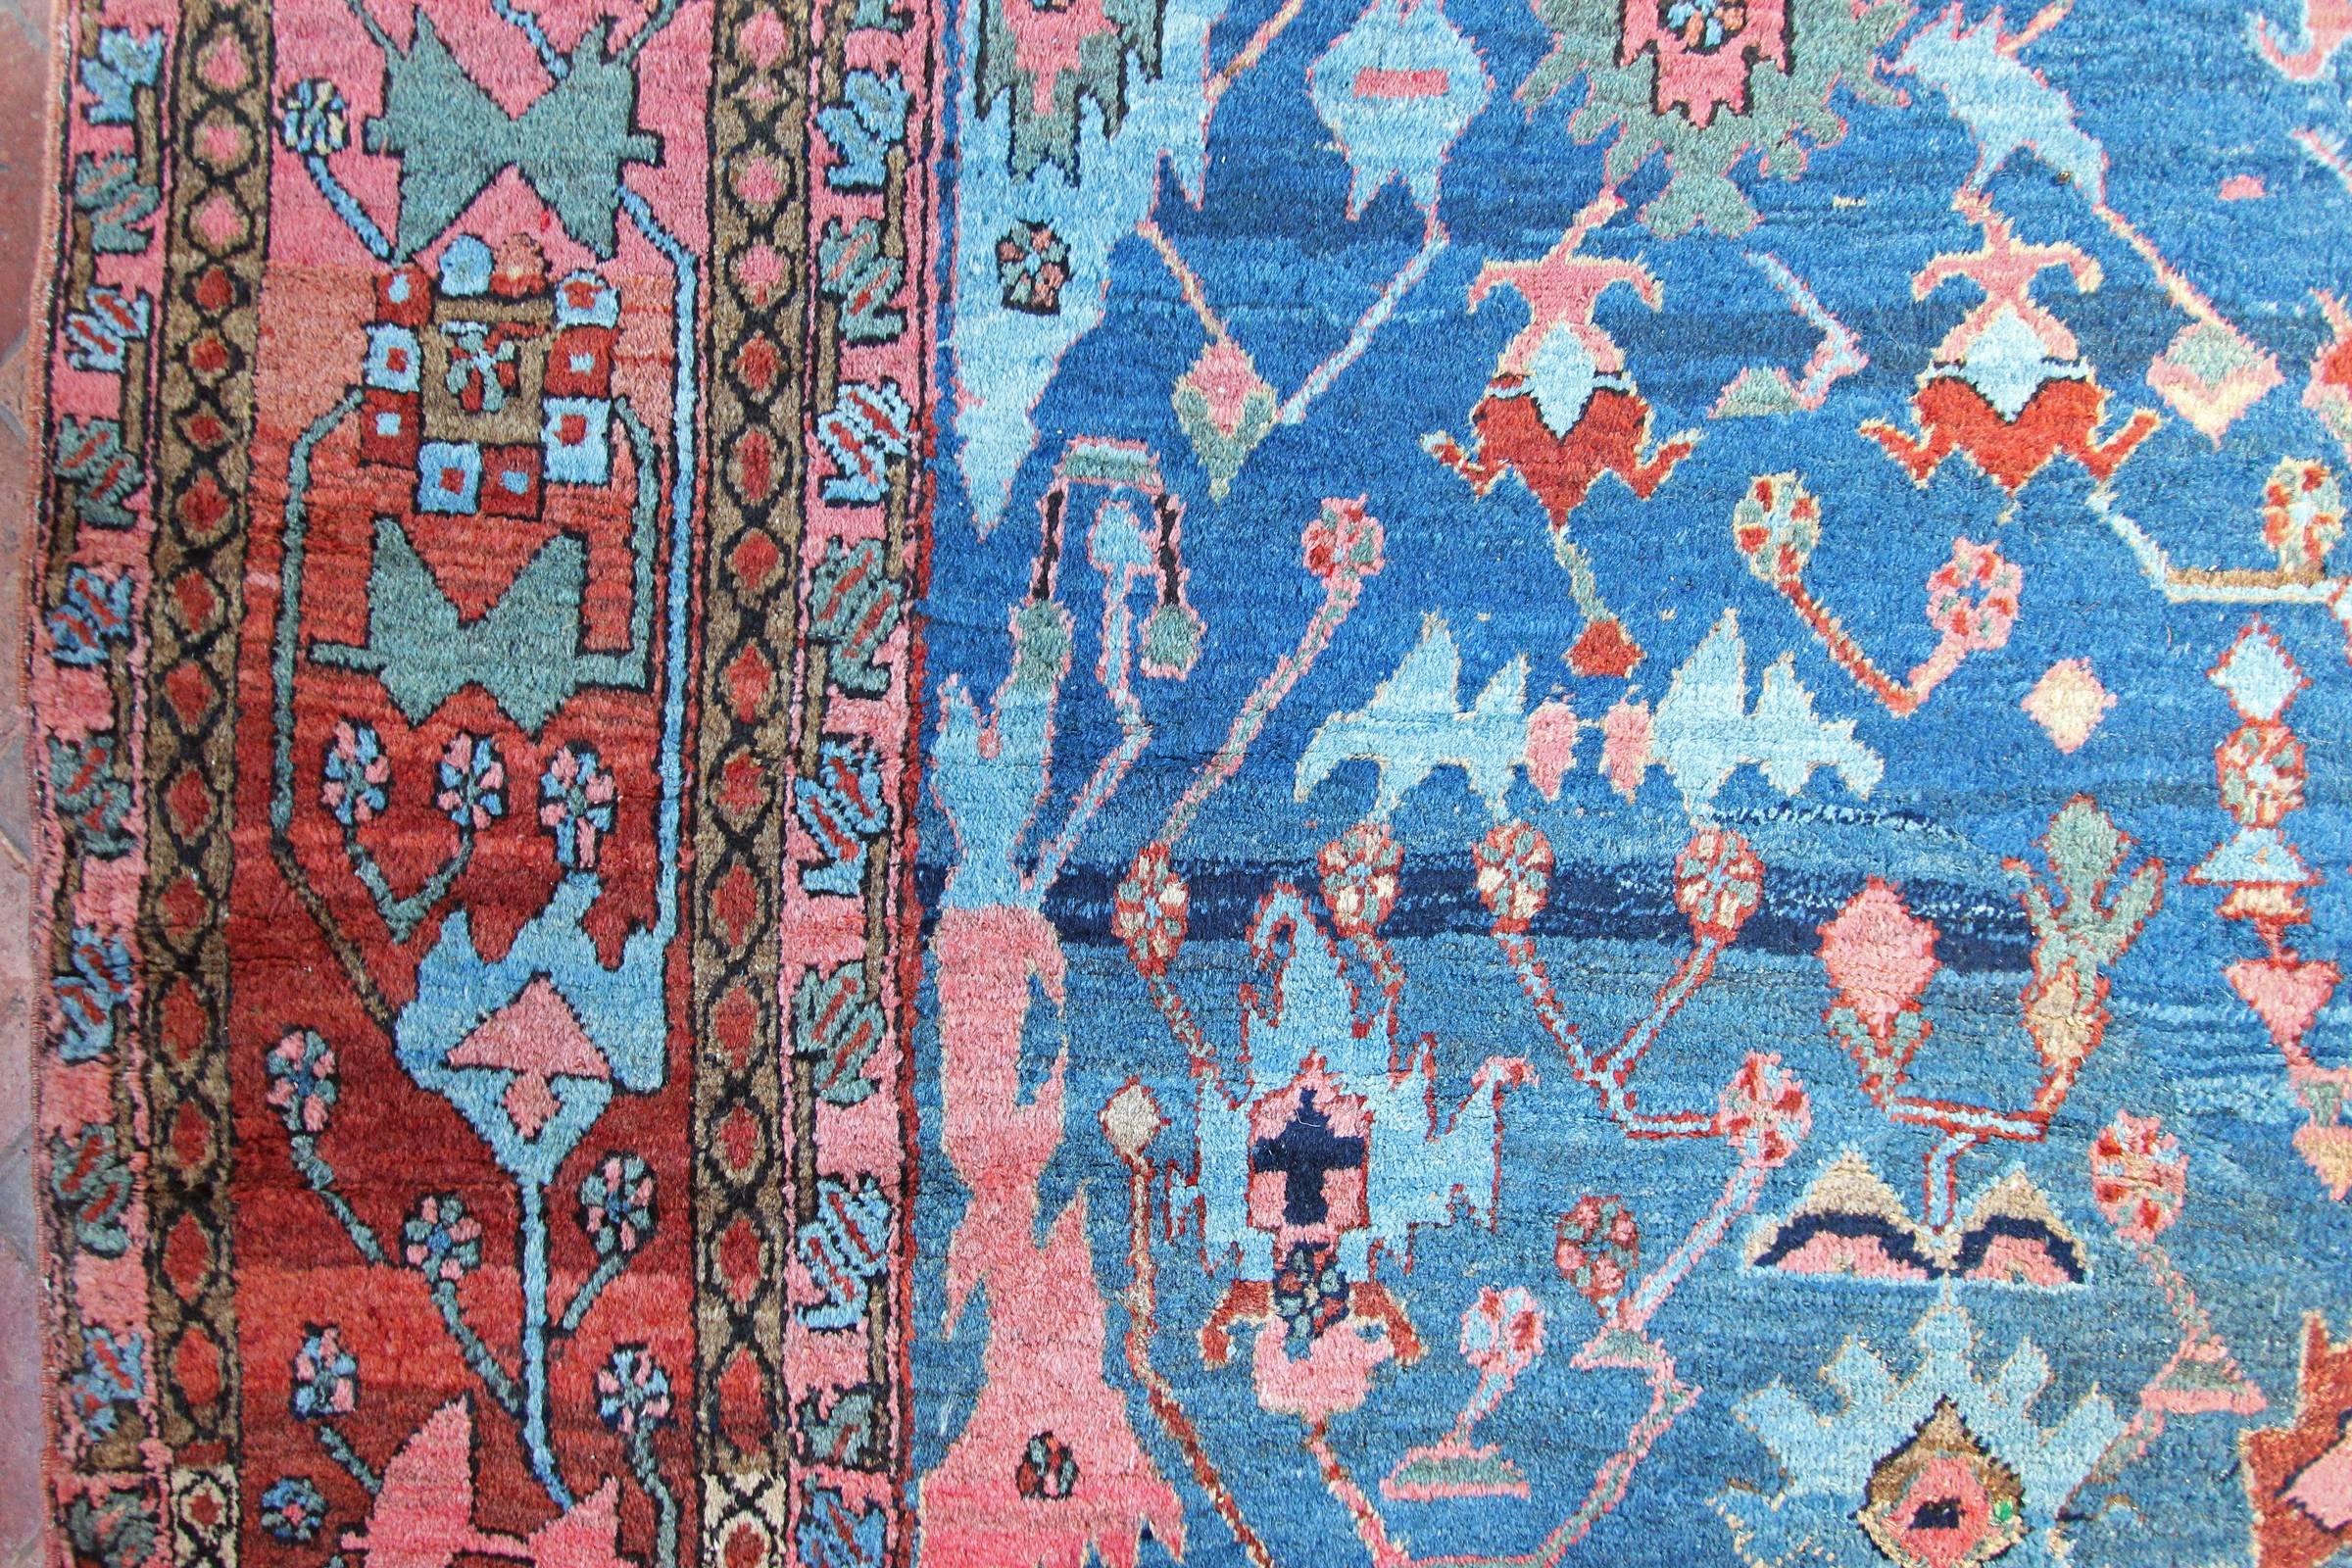 An antique Bakshaish carpet with exquisite colors and design.  More often Bakshaish carpets were woven in larger sizes and often with bold geometric designs and vivid colors. Their designs can be quite abstract and nearly always comprised of a